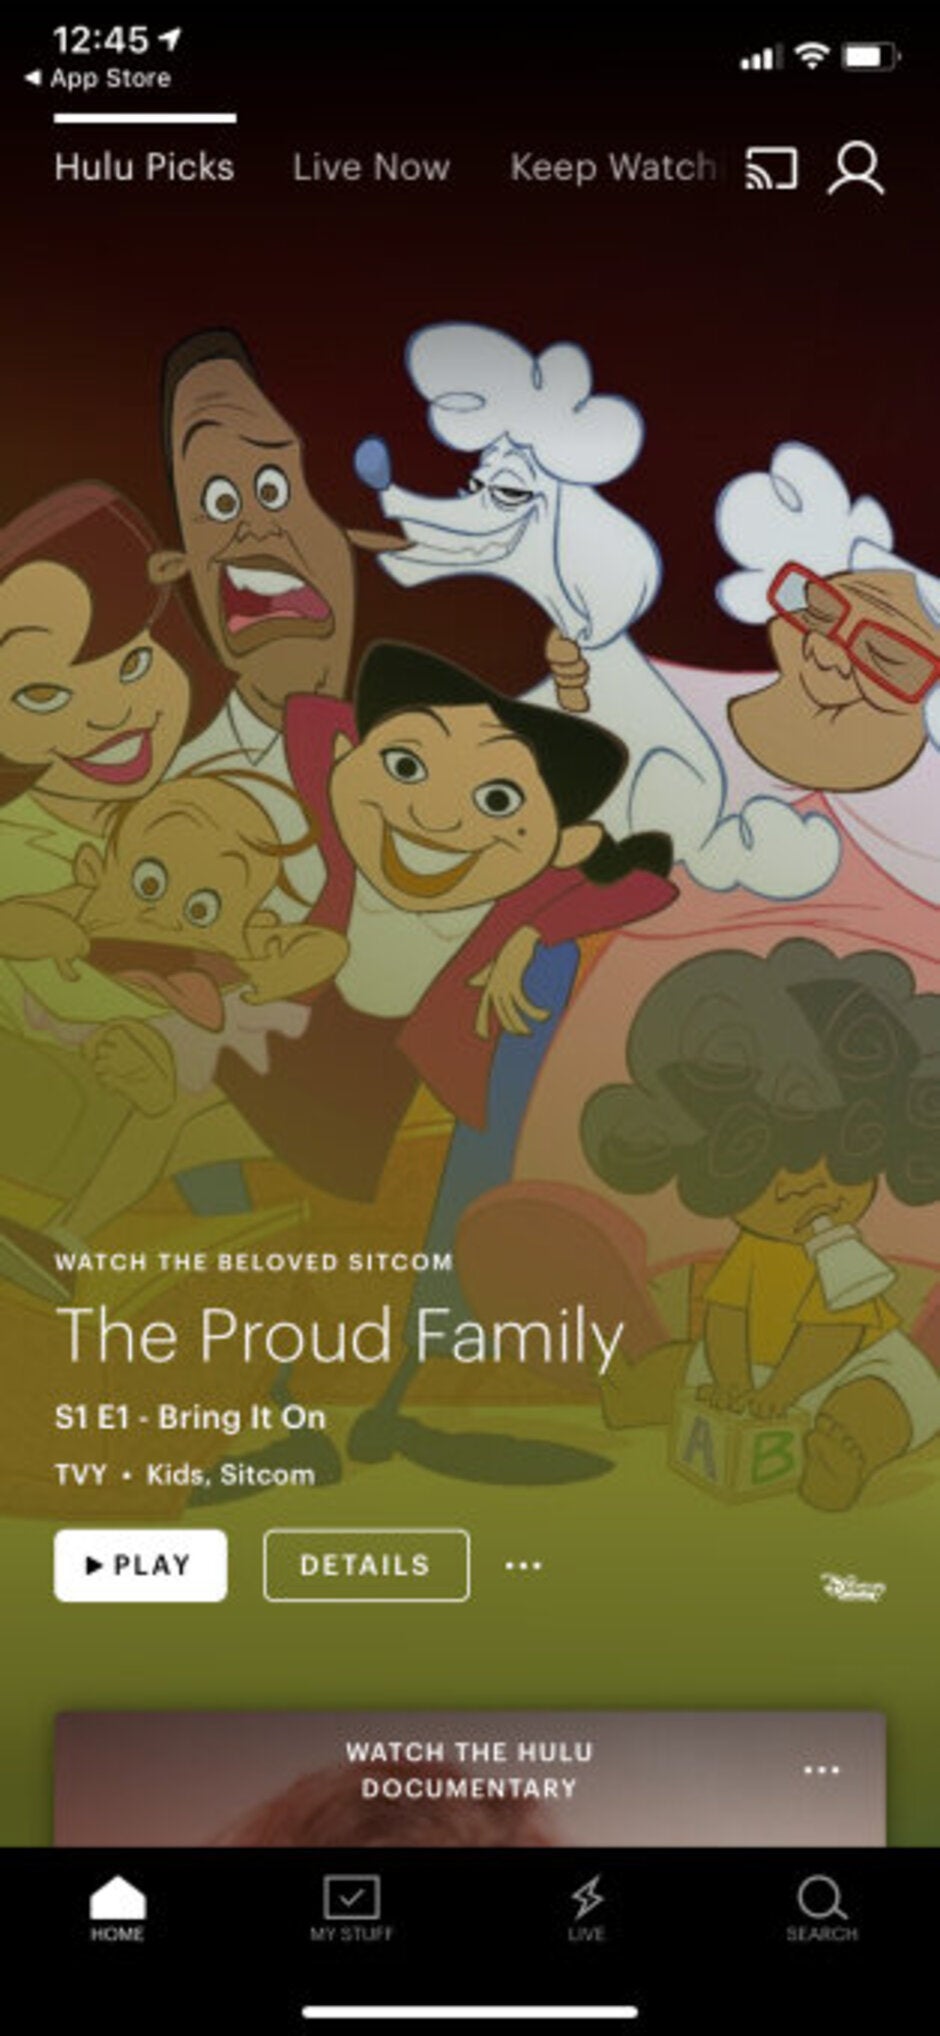 Hulu launches new iOS app, Android version coming later on